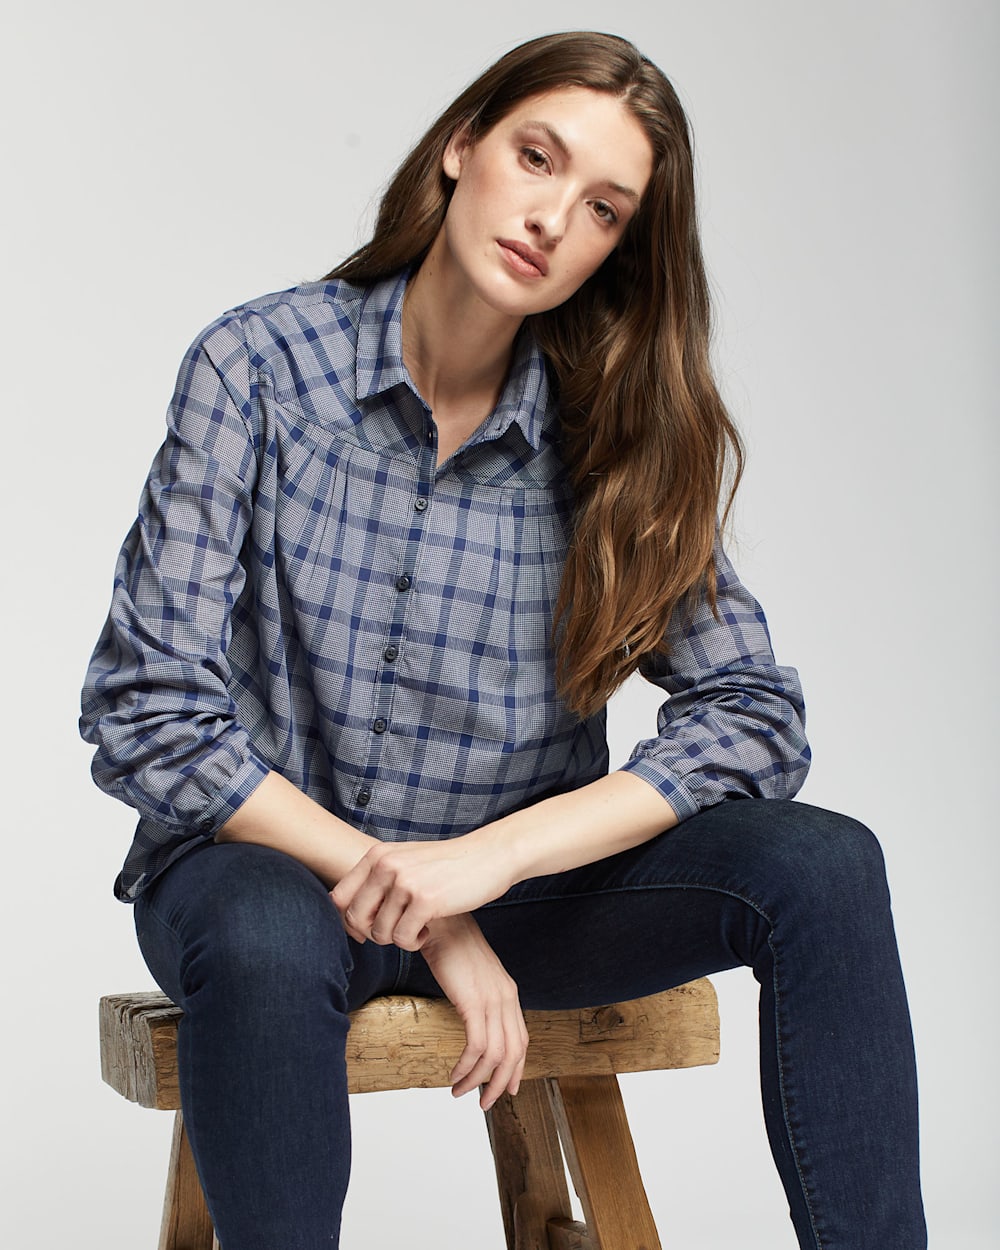 ALTERNATE VIEW OF WOMEN'S AIRY COTTON SHIRT IN NAVY/WHITE PLAID image number 5